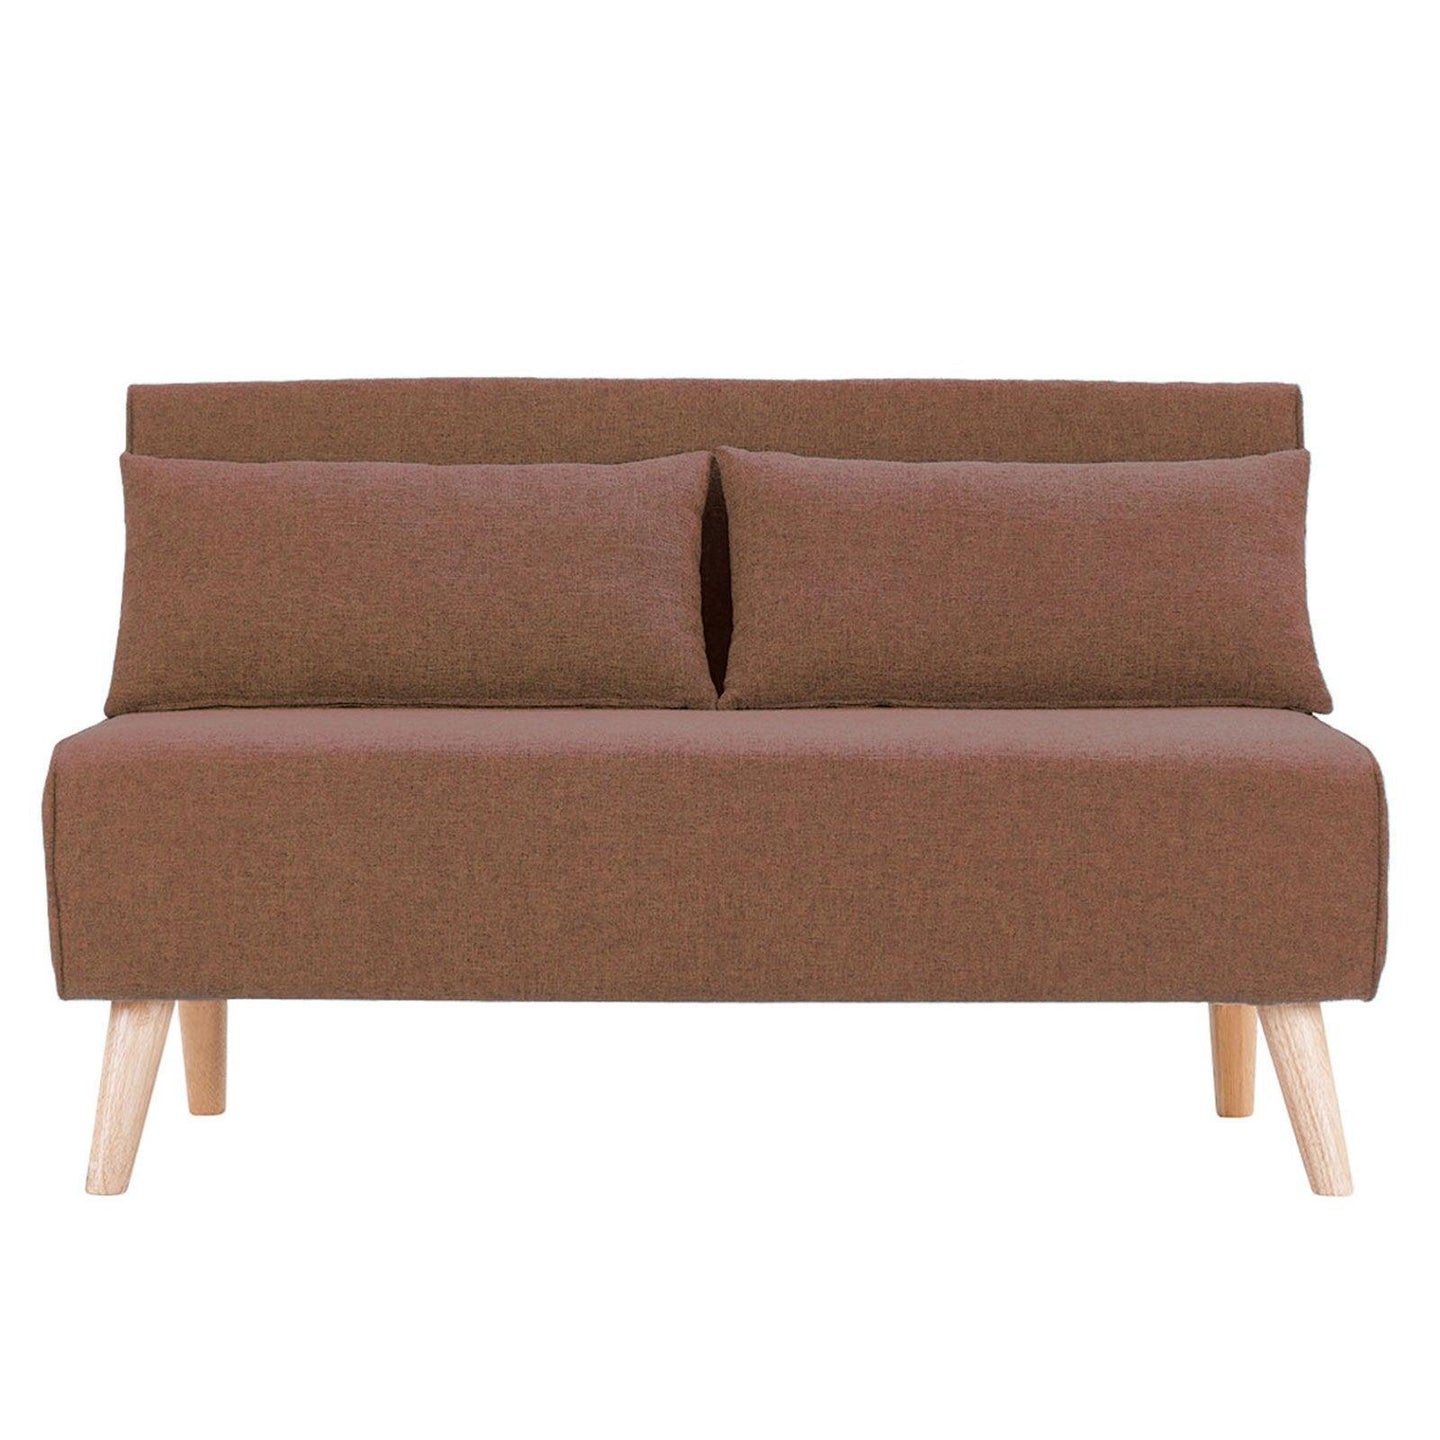 Buy Sarantino 2-Seater Adjustable Sofa Bed Lounge Faux Linen - Brown discounted | Products On Sale Australia